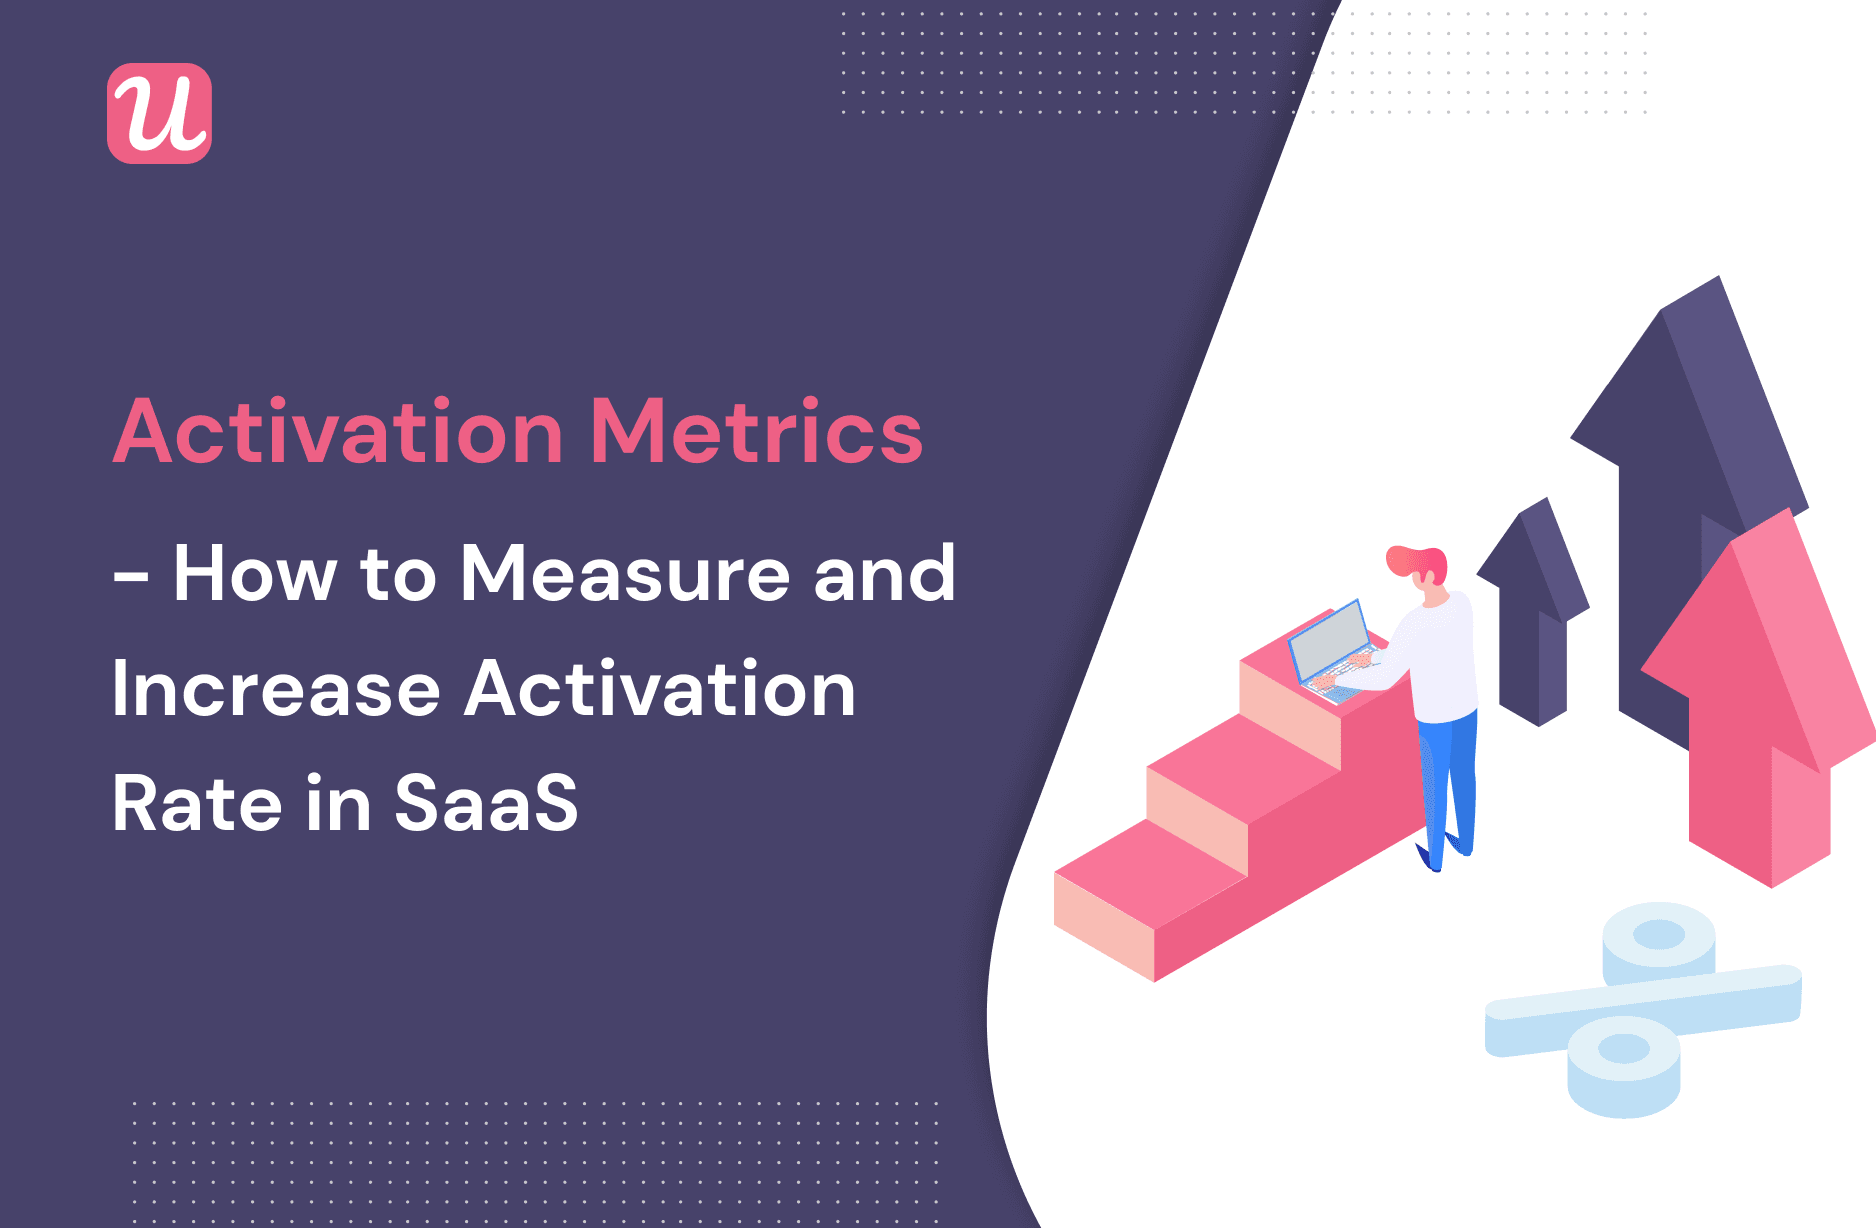 Activation Metrics - How To Measure And Increase Activation Rate in SaaS